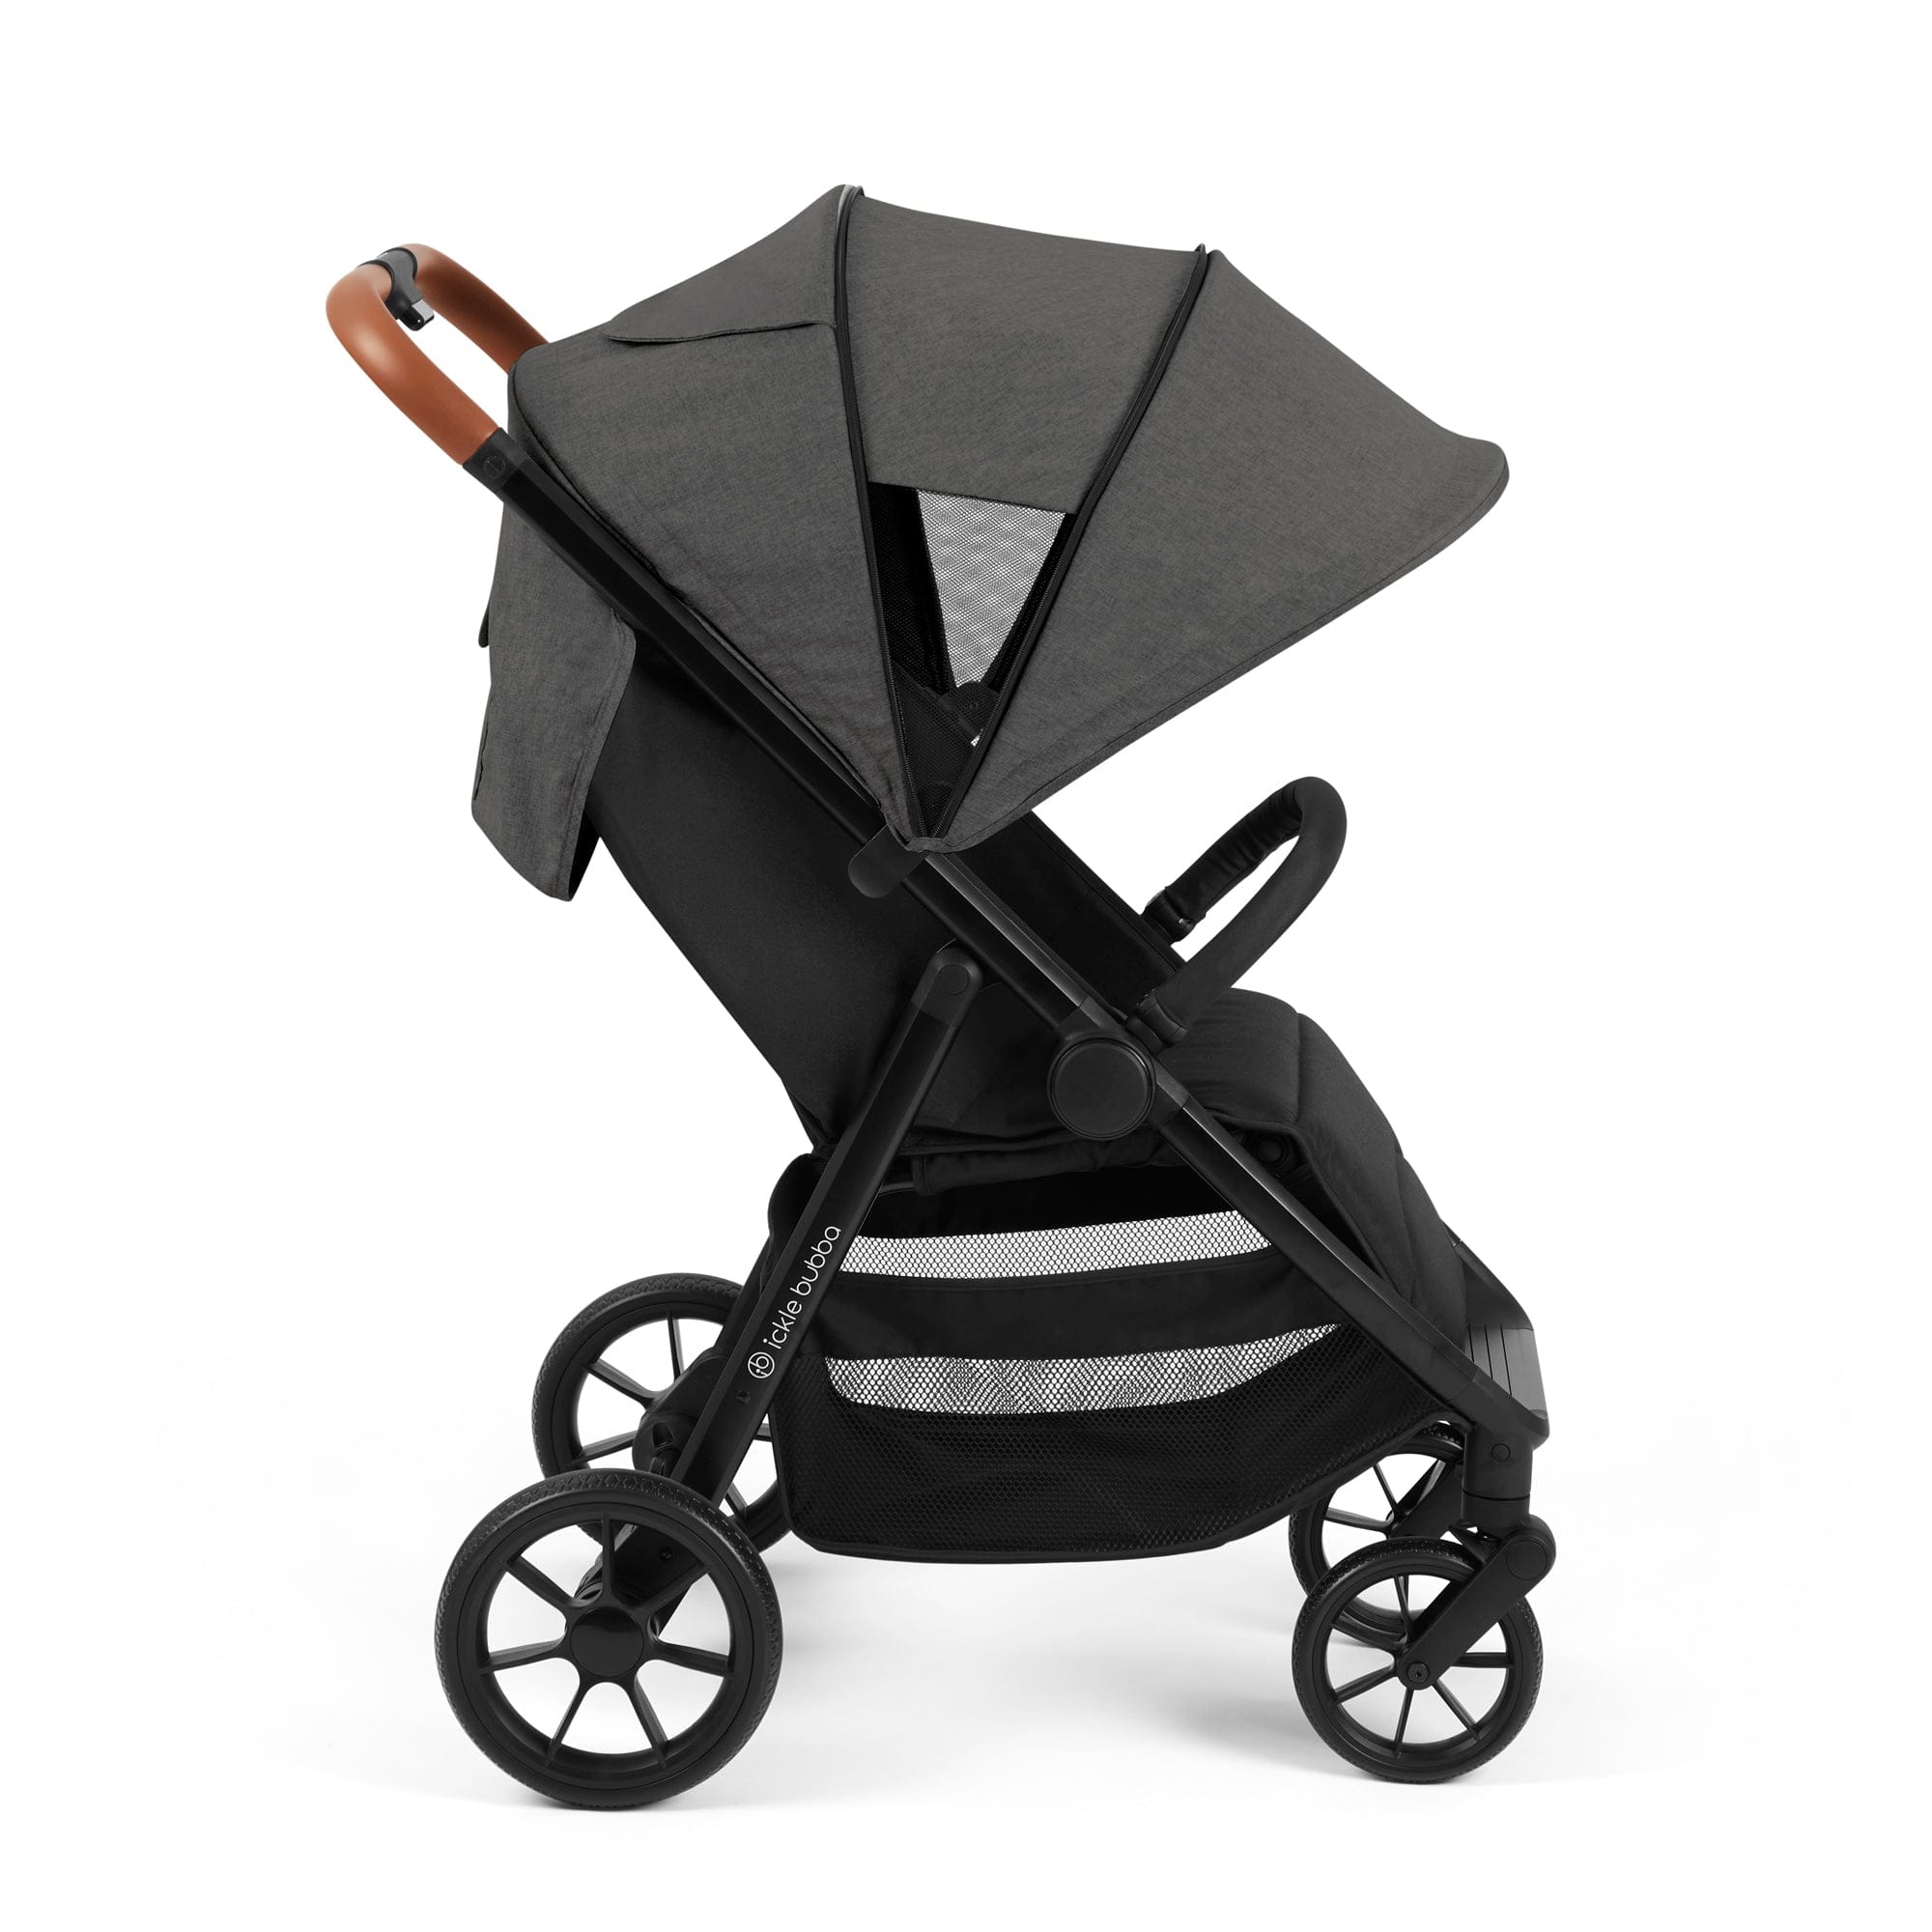 Ickle Bubba Pushchairs & Buggies STOMP STRIDE PRIME Pushchair (Charcoal Grey) 15-006-300-148